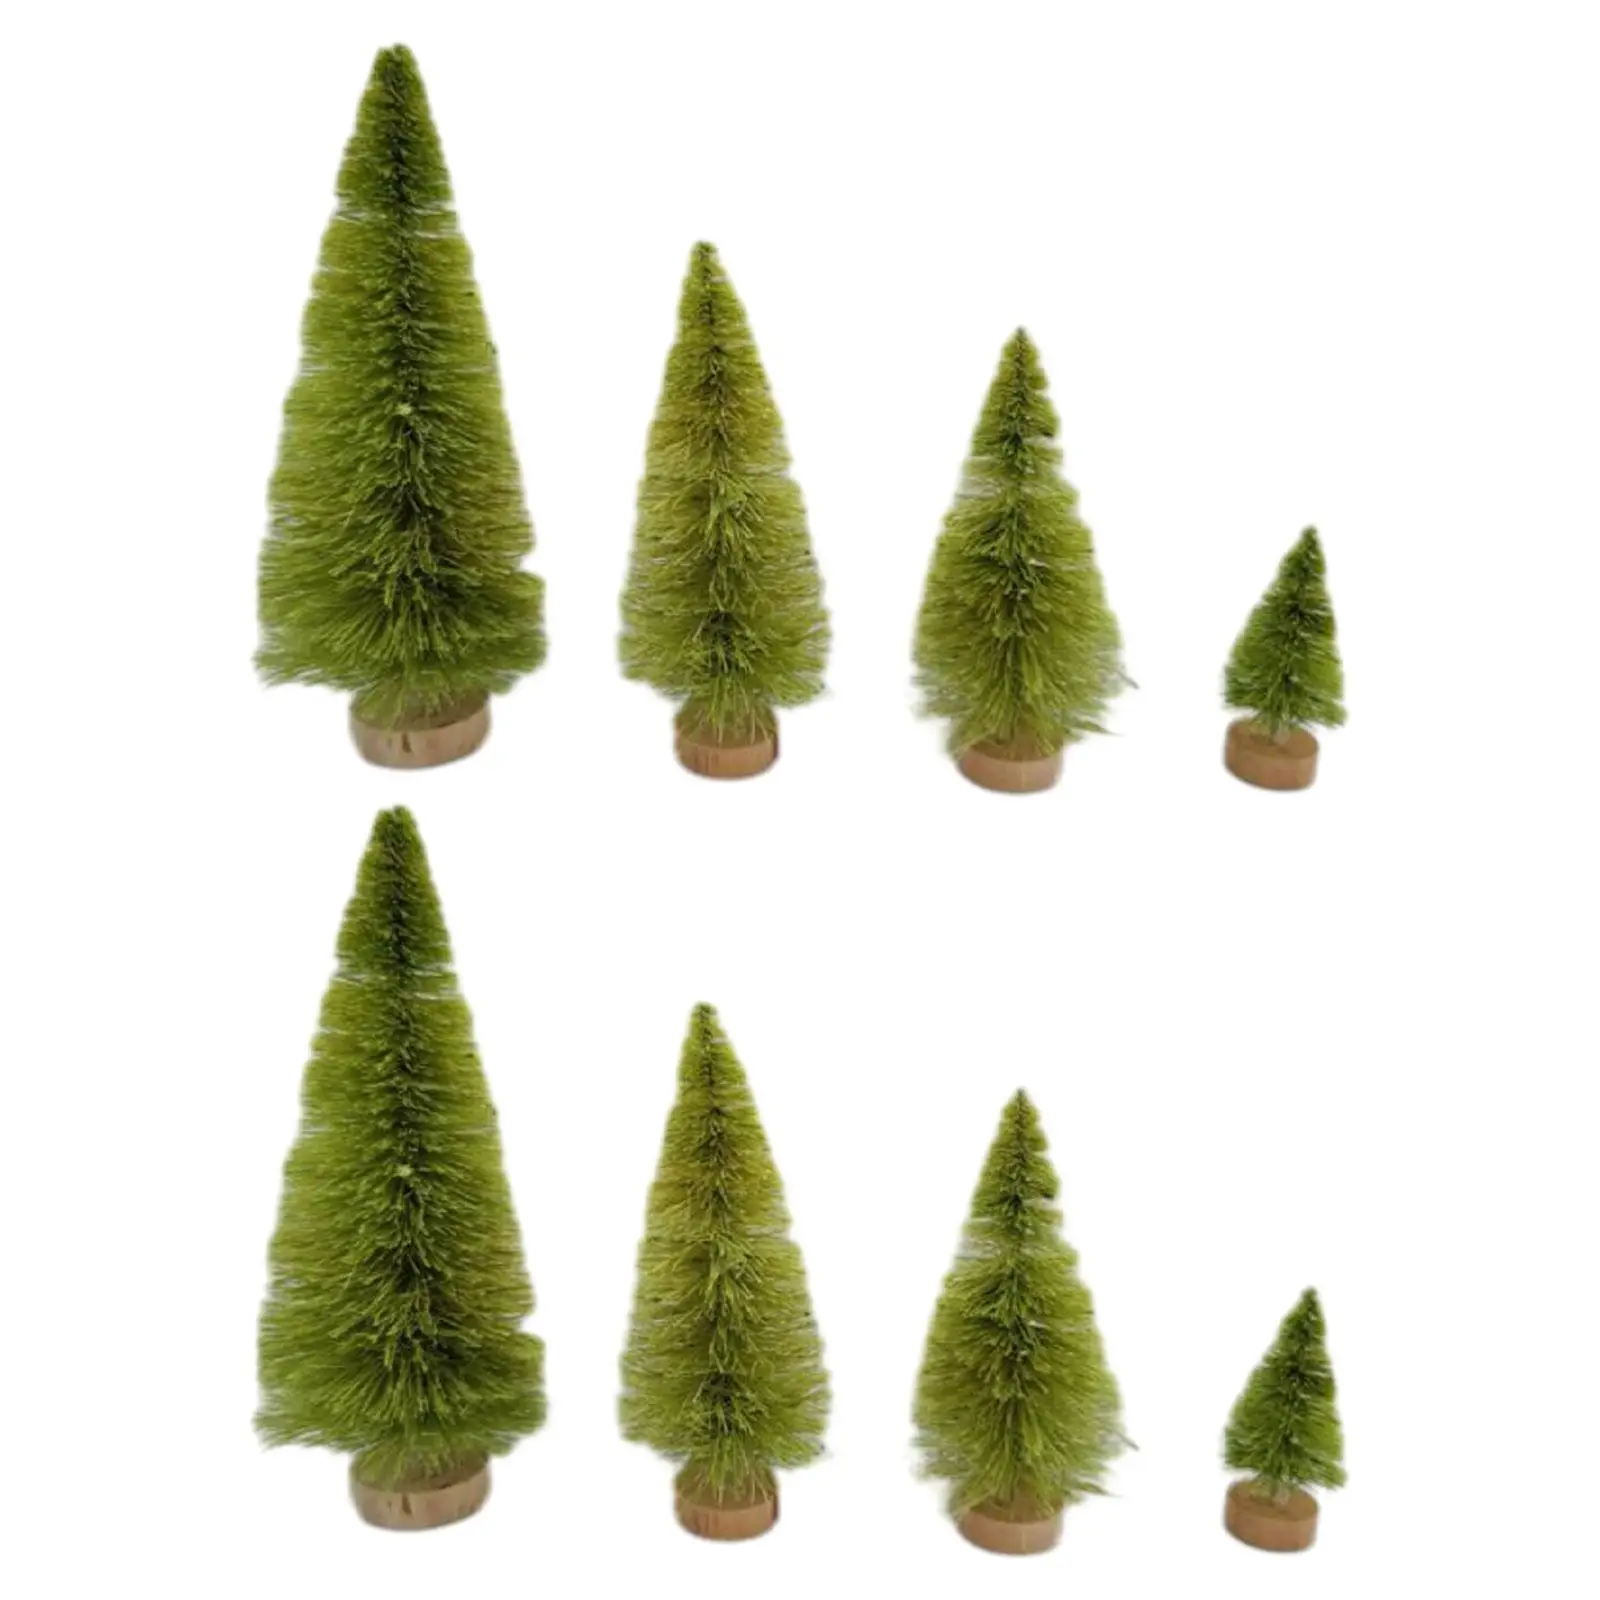 8x Artificial Christmas Tree Table Mini Models Wooden Base Crafts Christmas Decor for Centerpiece Party Bar Dollhouse Indoor